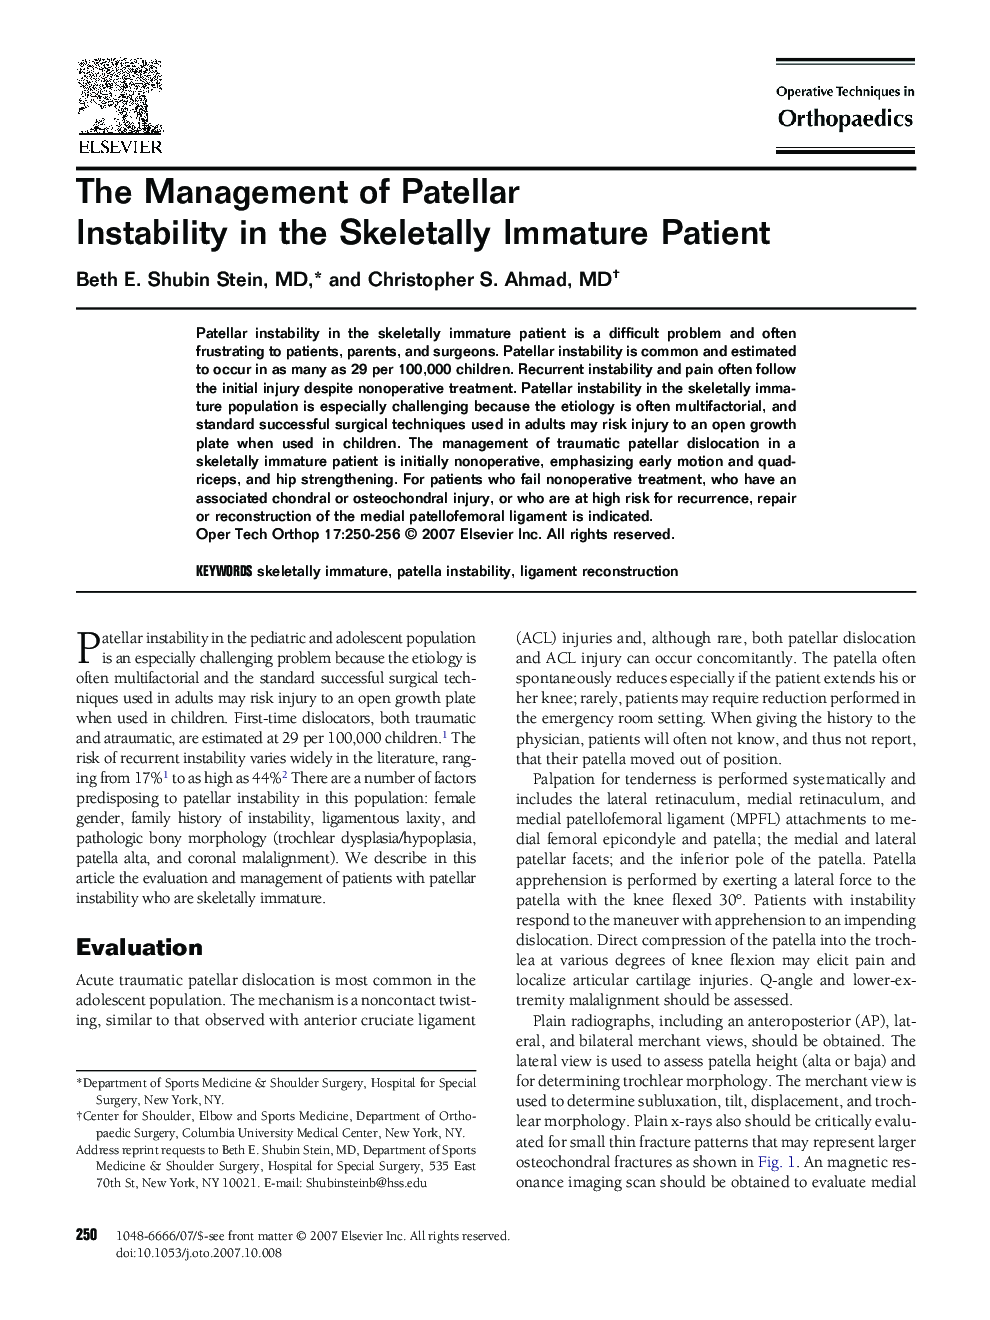 The Management of Patellar Instability in the Skeletally Immature Patient